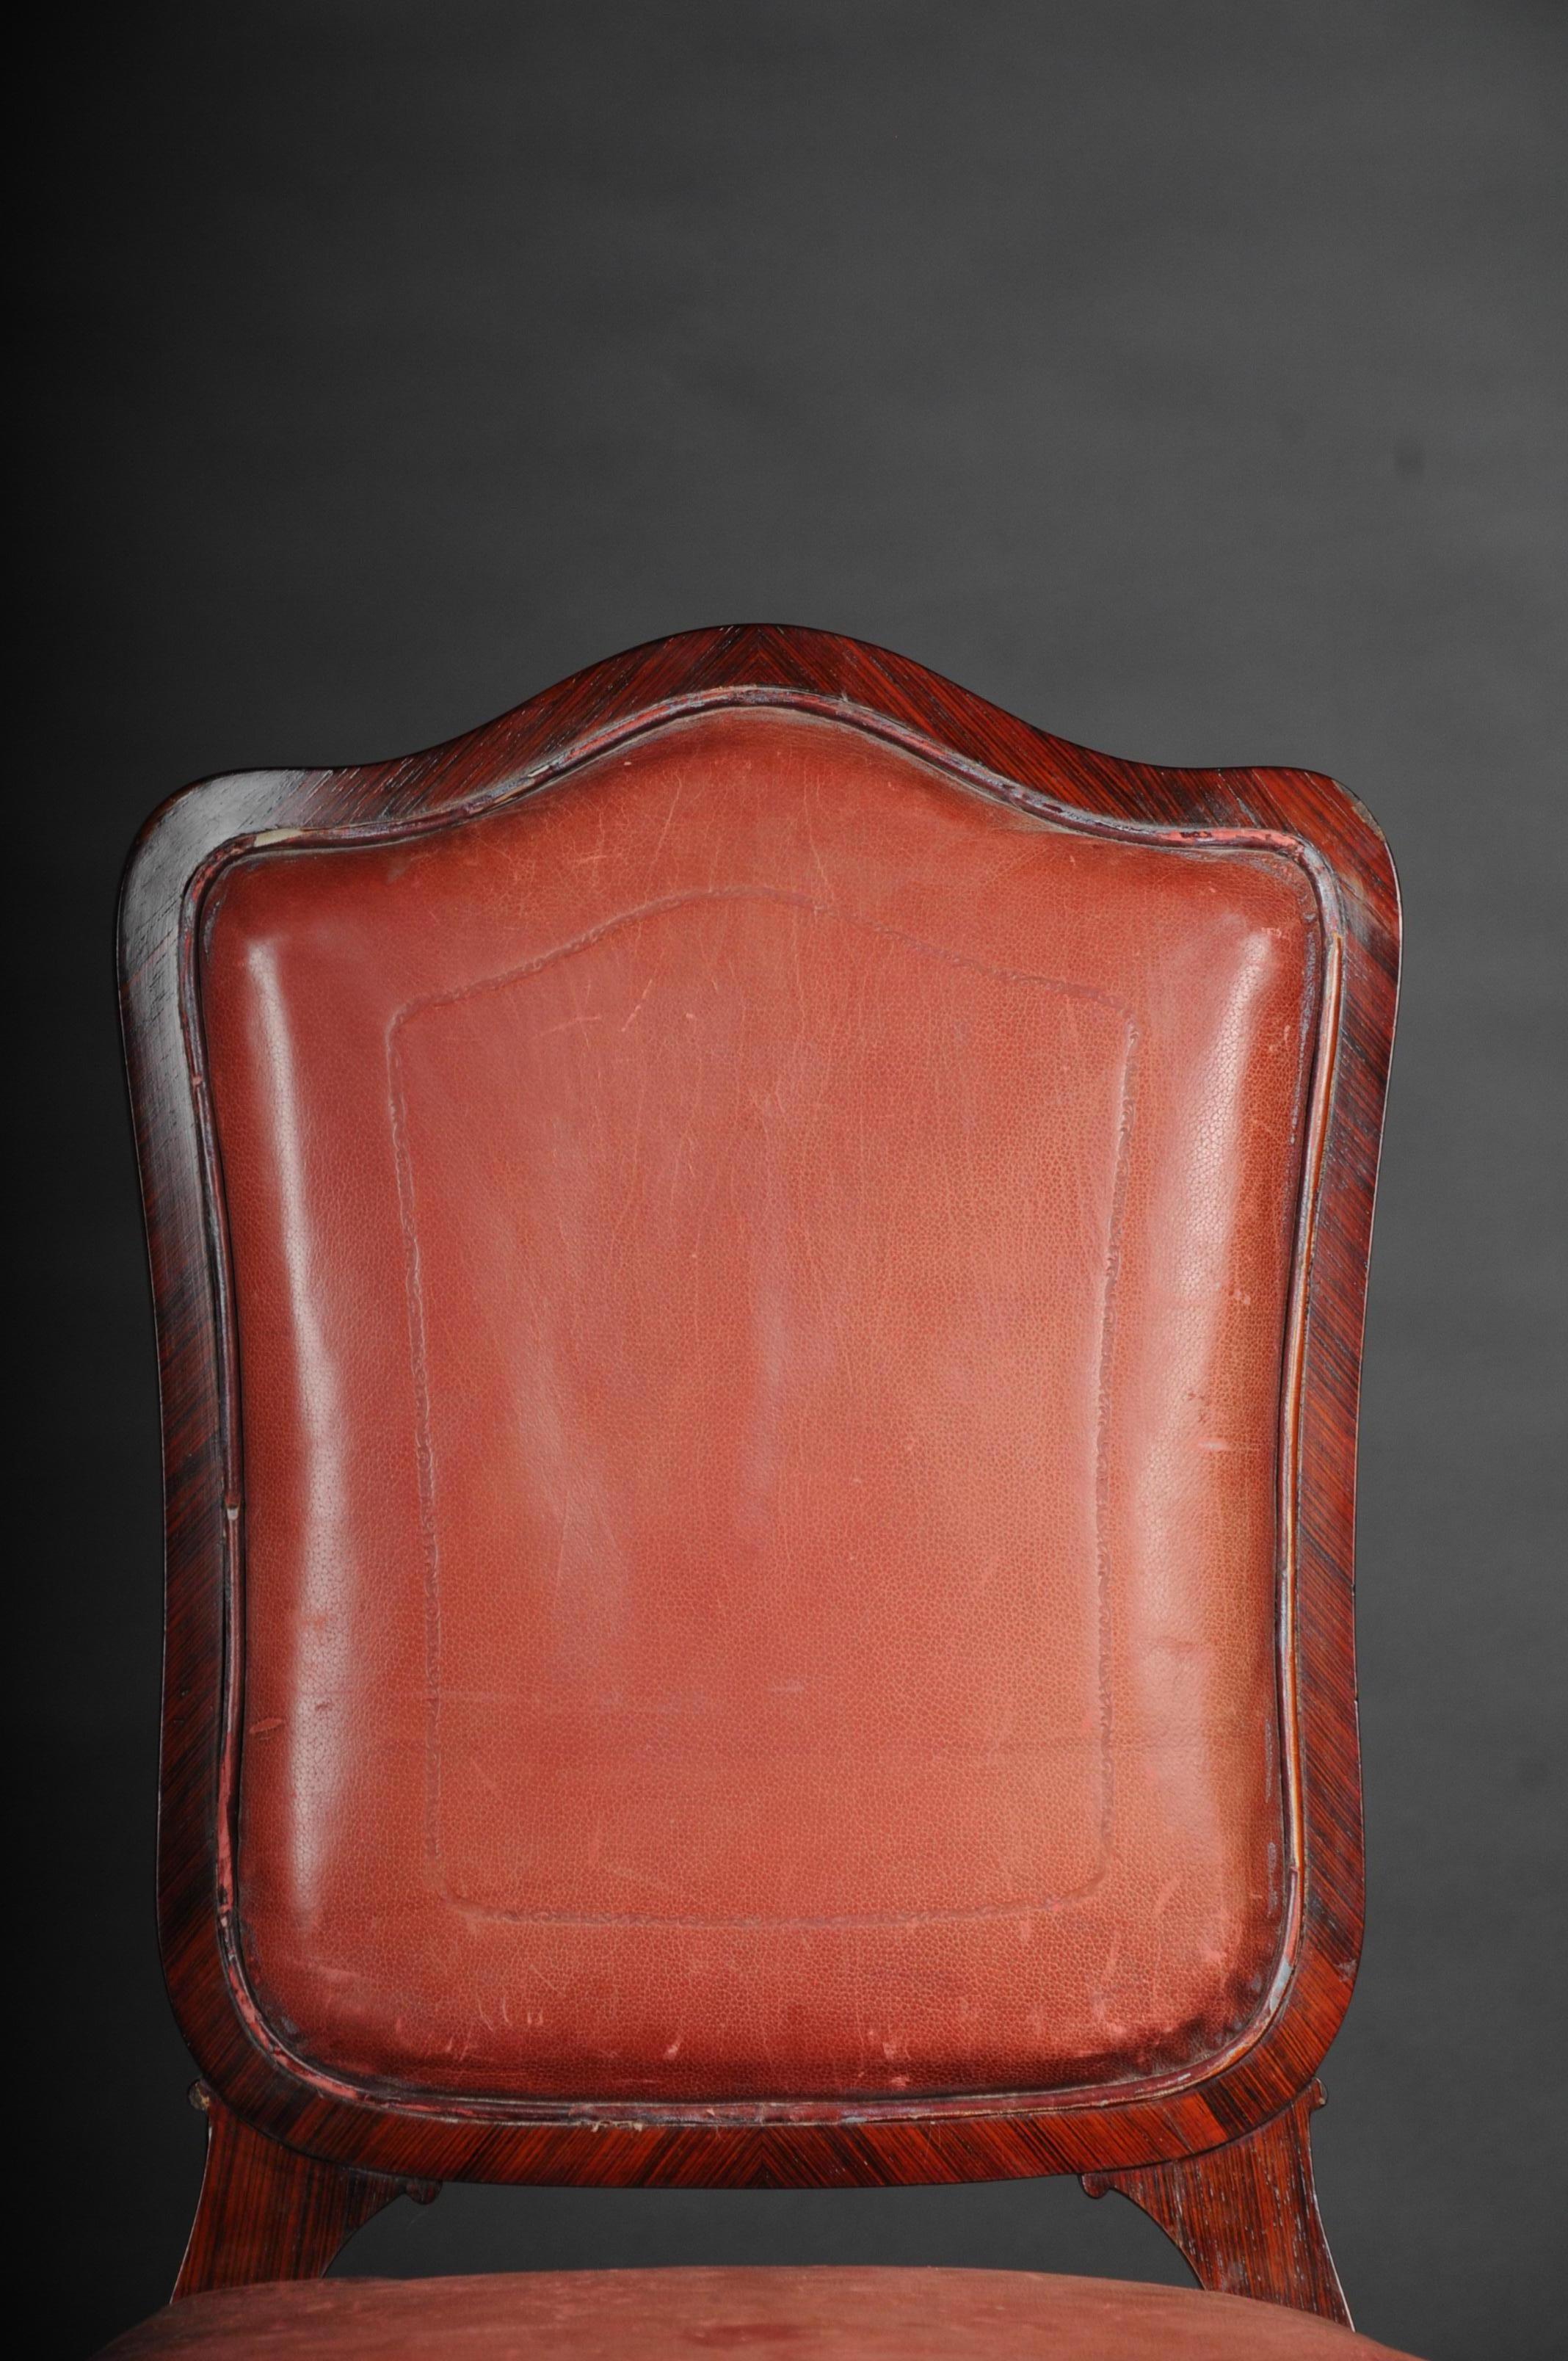 tulipwood veneered on solid wood. Appropriately curly and elegant shape.
Seat and backrest are finished with a historical, classic upholstery.


(C-149).